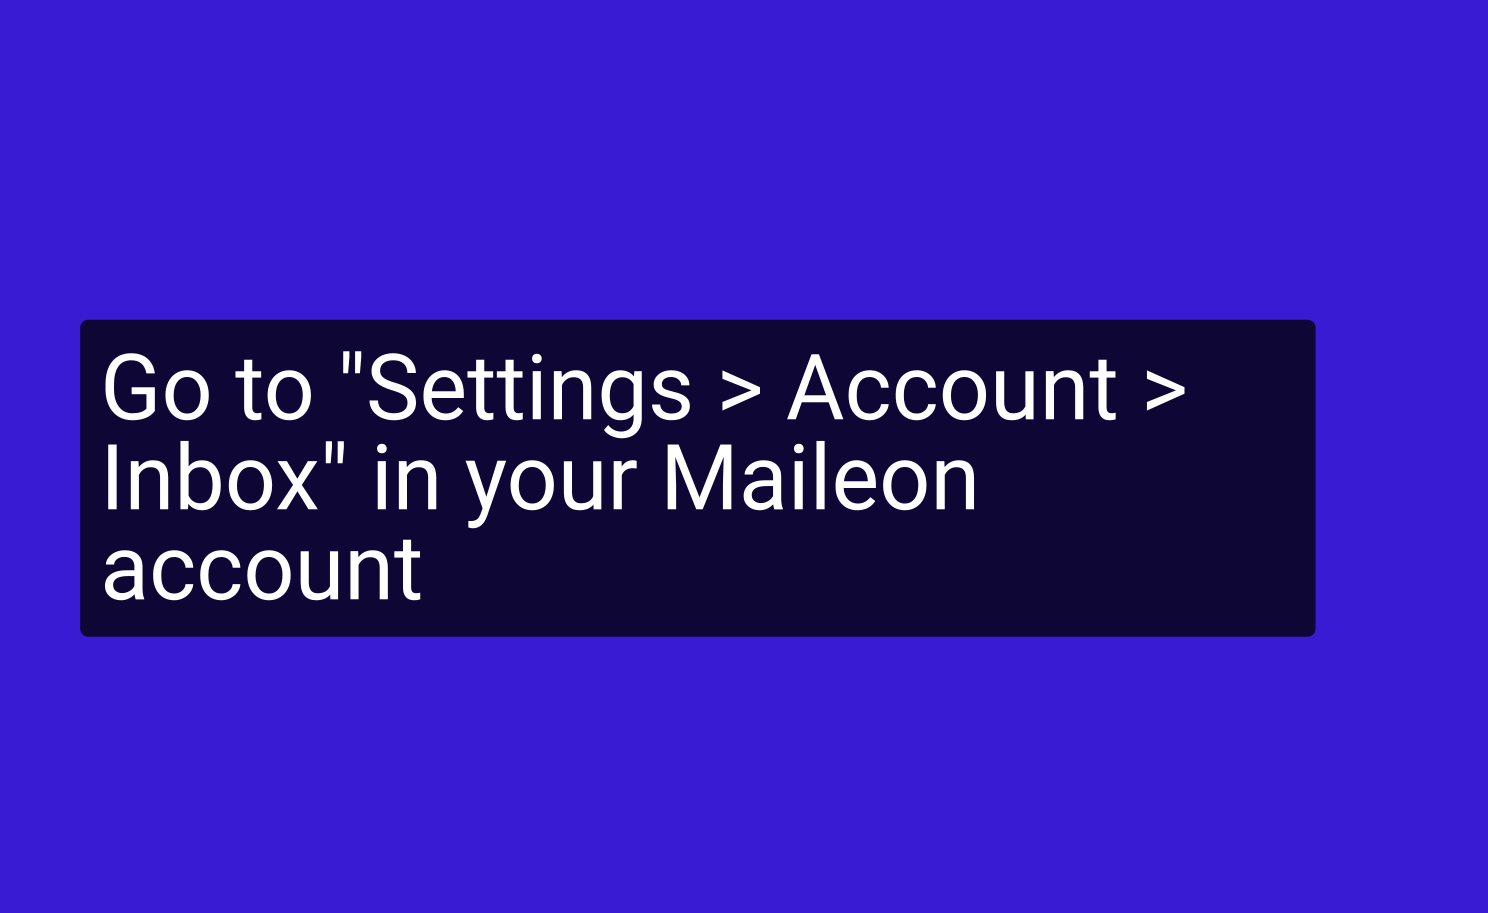 Go to 'Settings > Account > Inbox' in your Maileon account